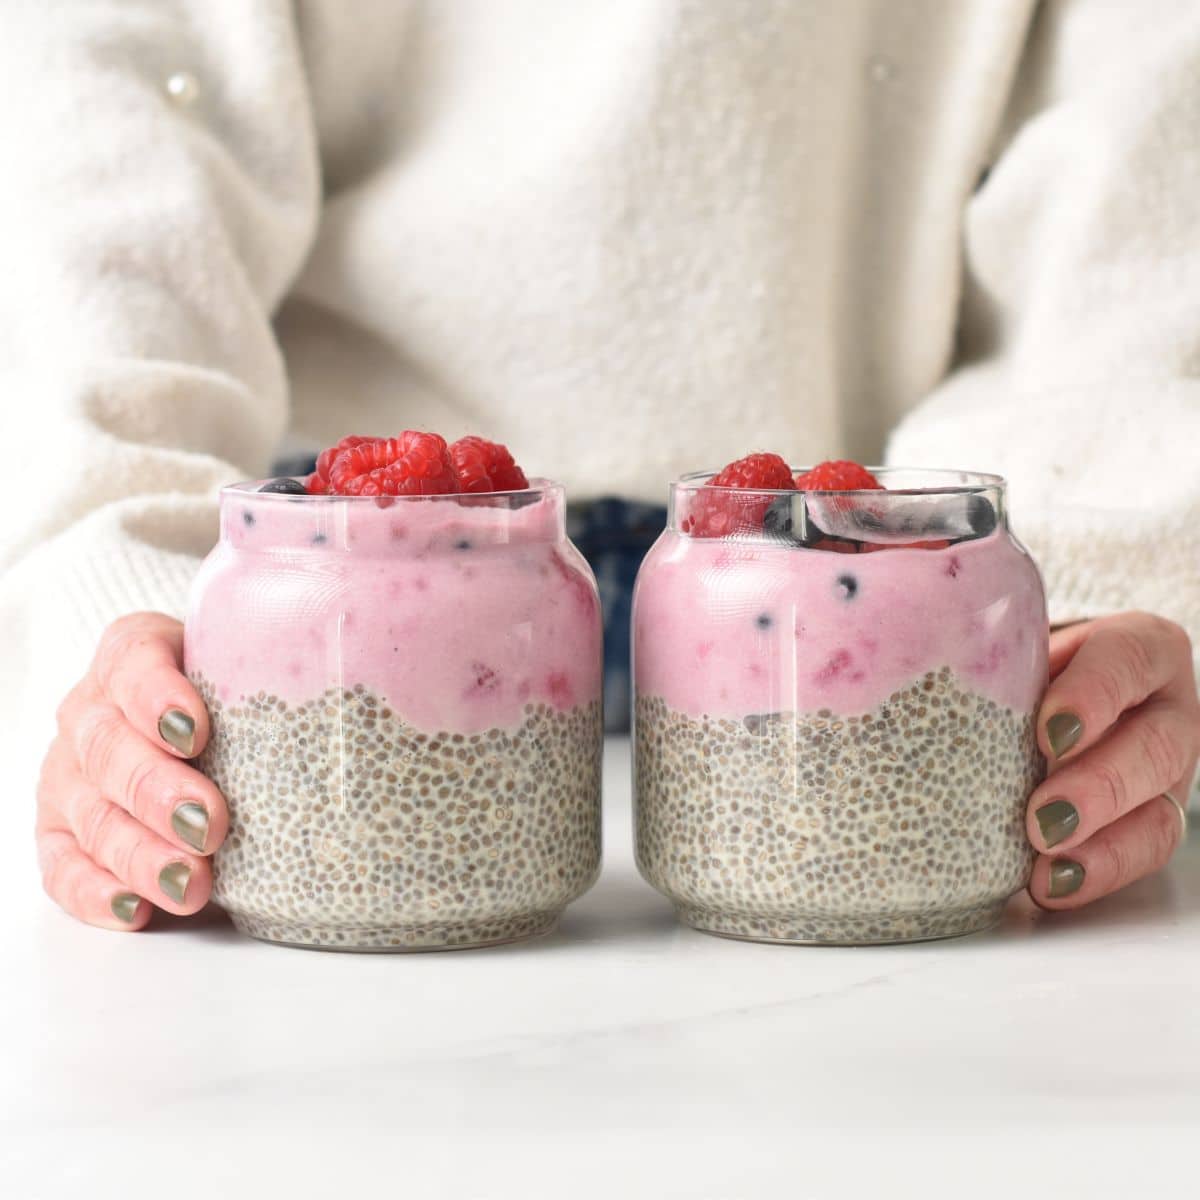 High Protein Chia Pudding in two jars, decorated with raspberries and blueberries.